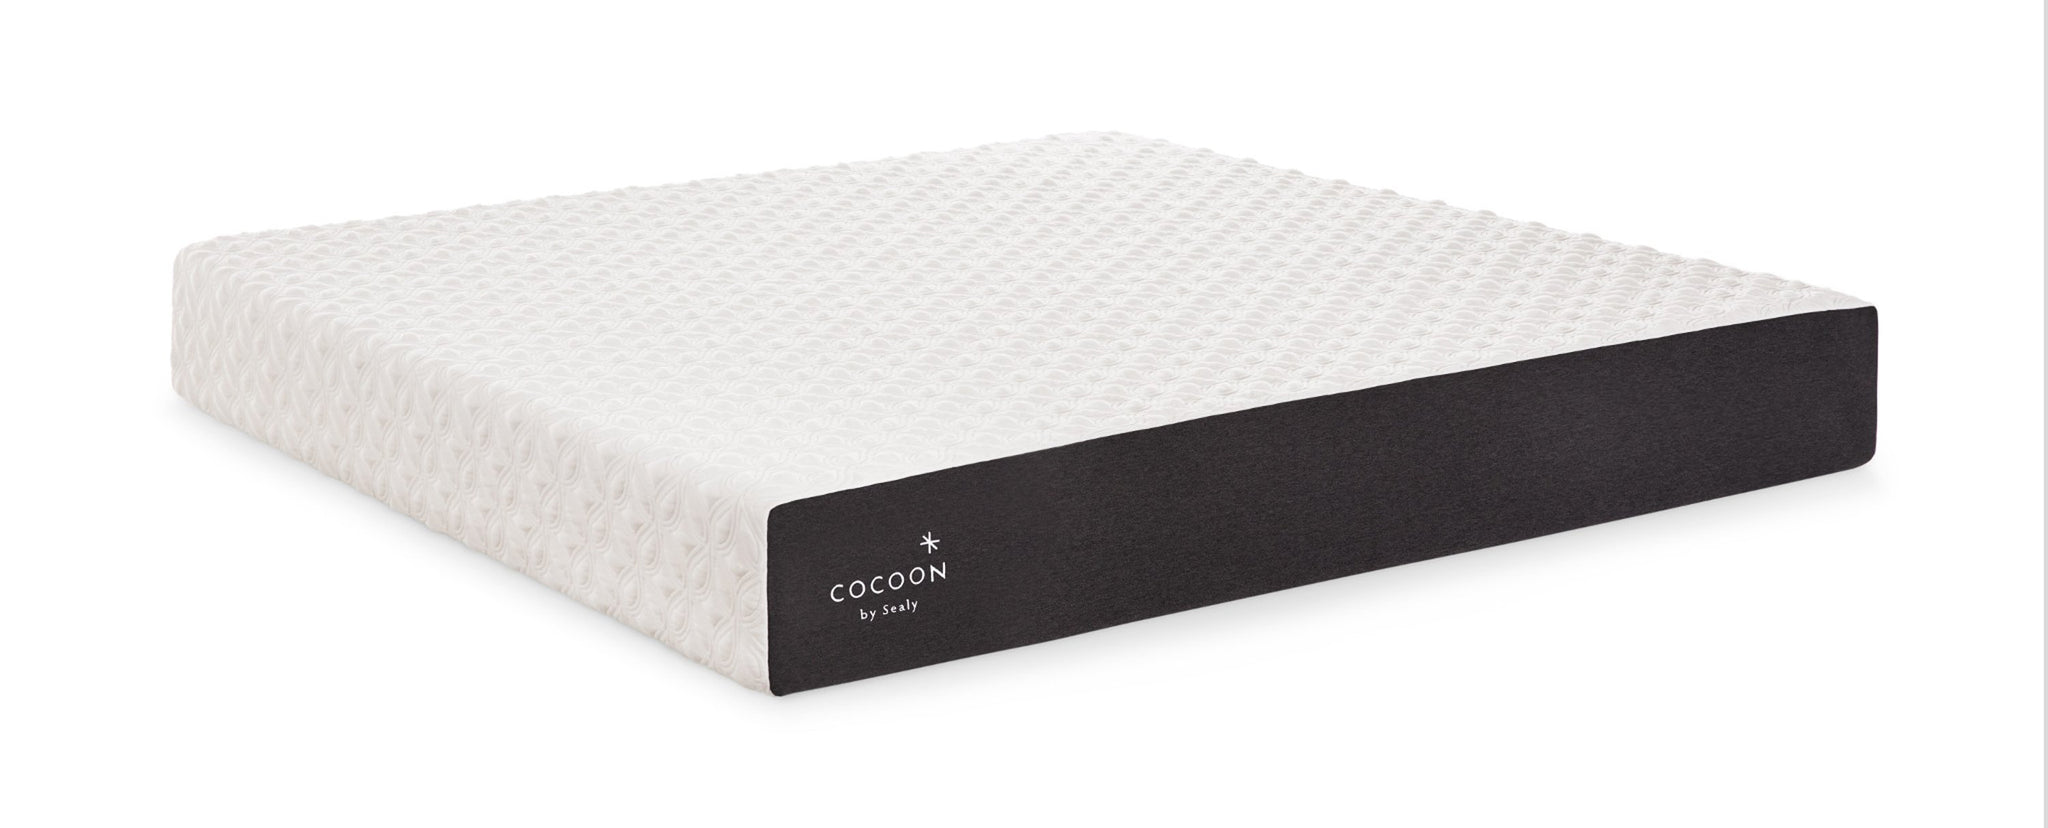 Picture of Cocoon Mattress by Sealy - King - 8" Thickness